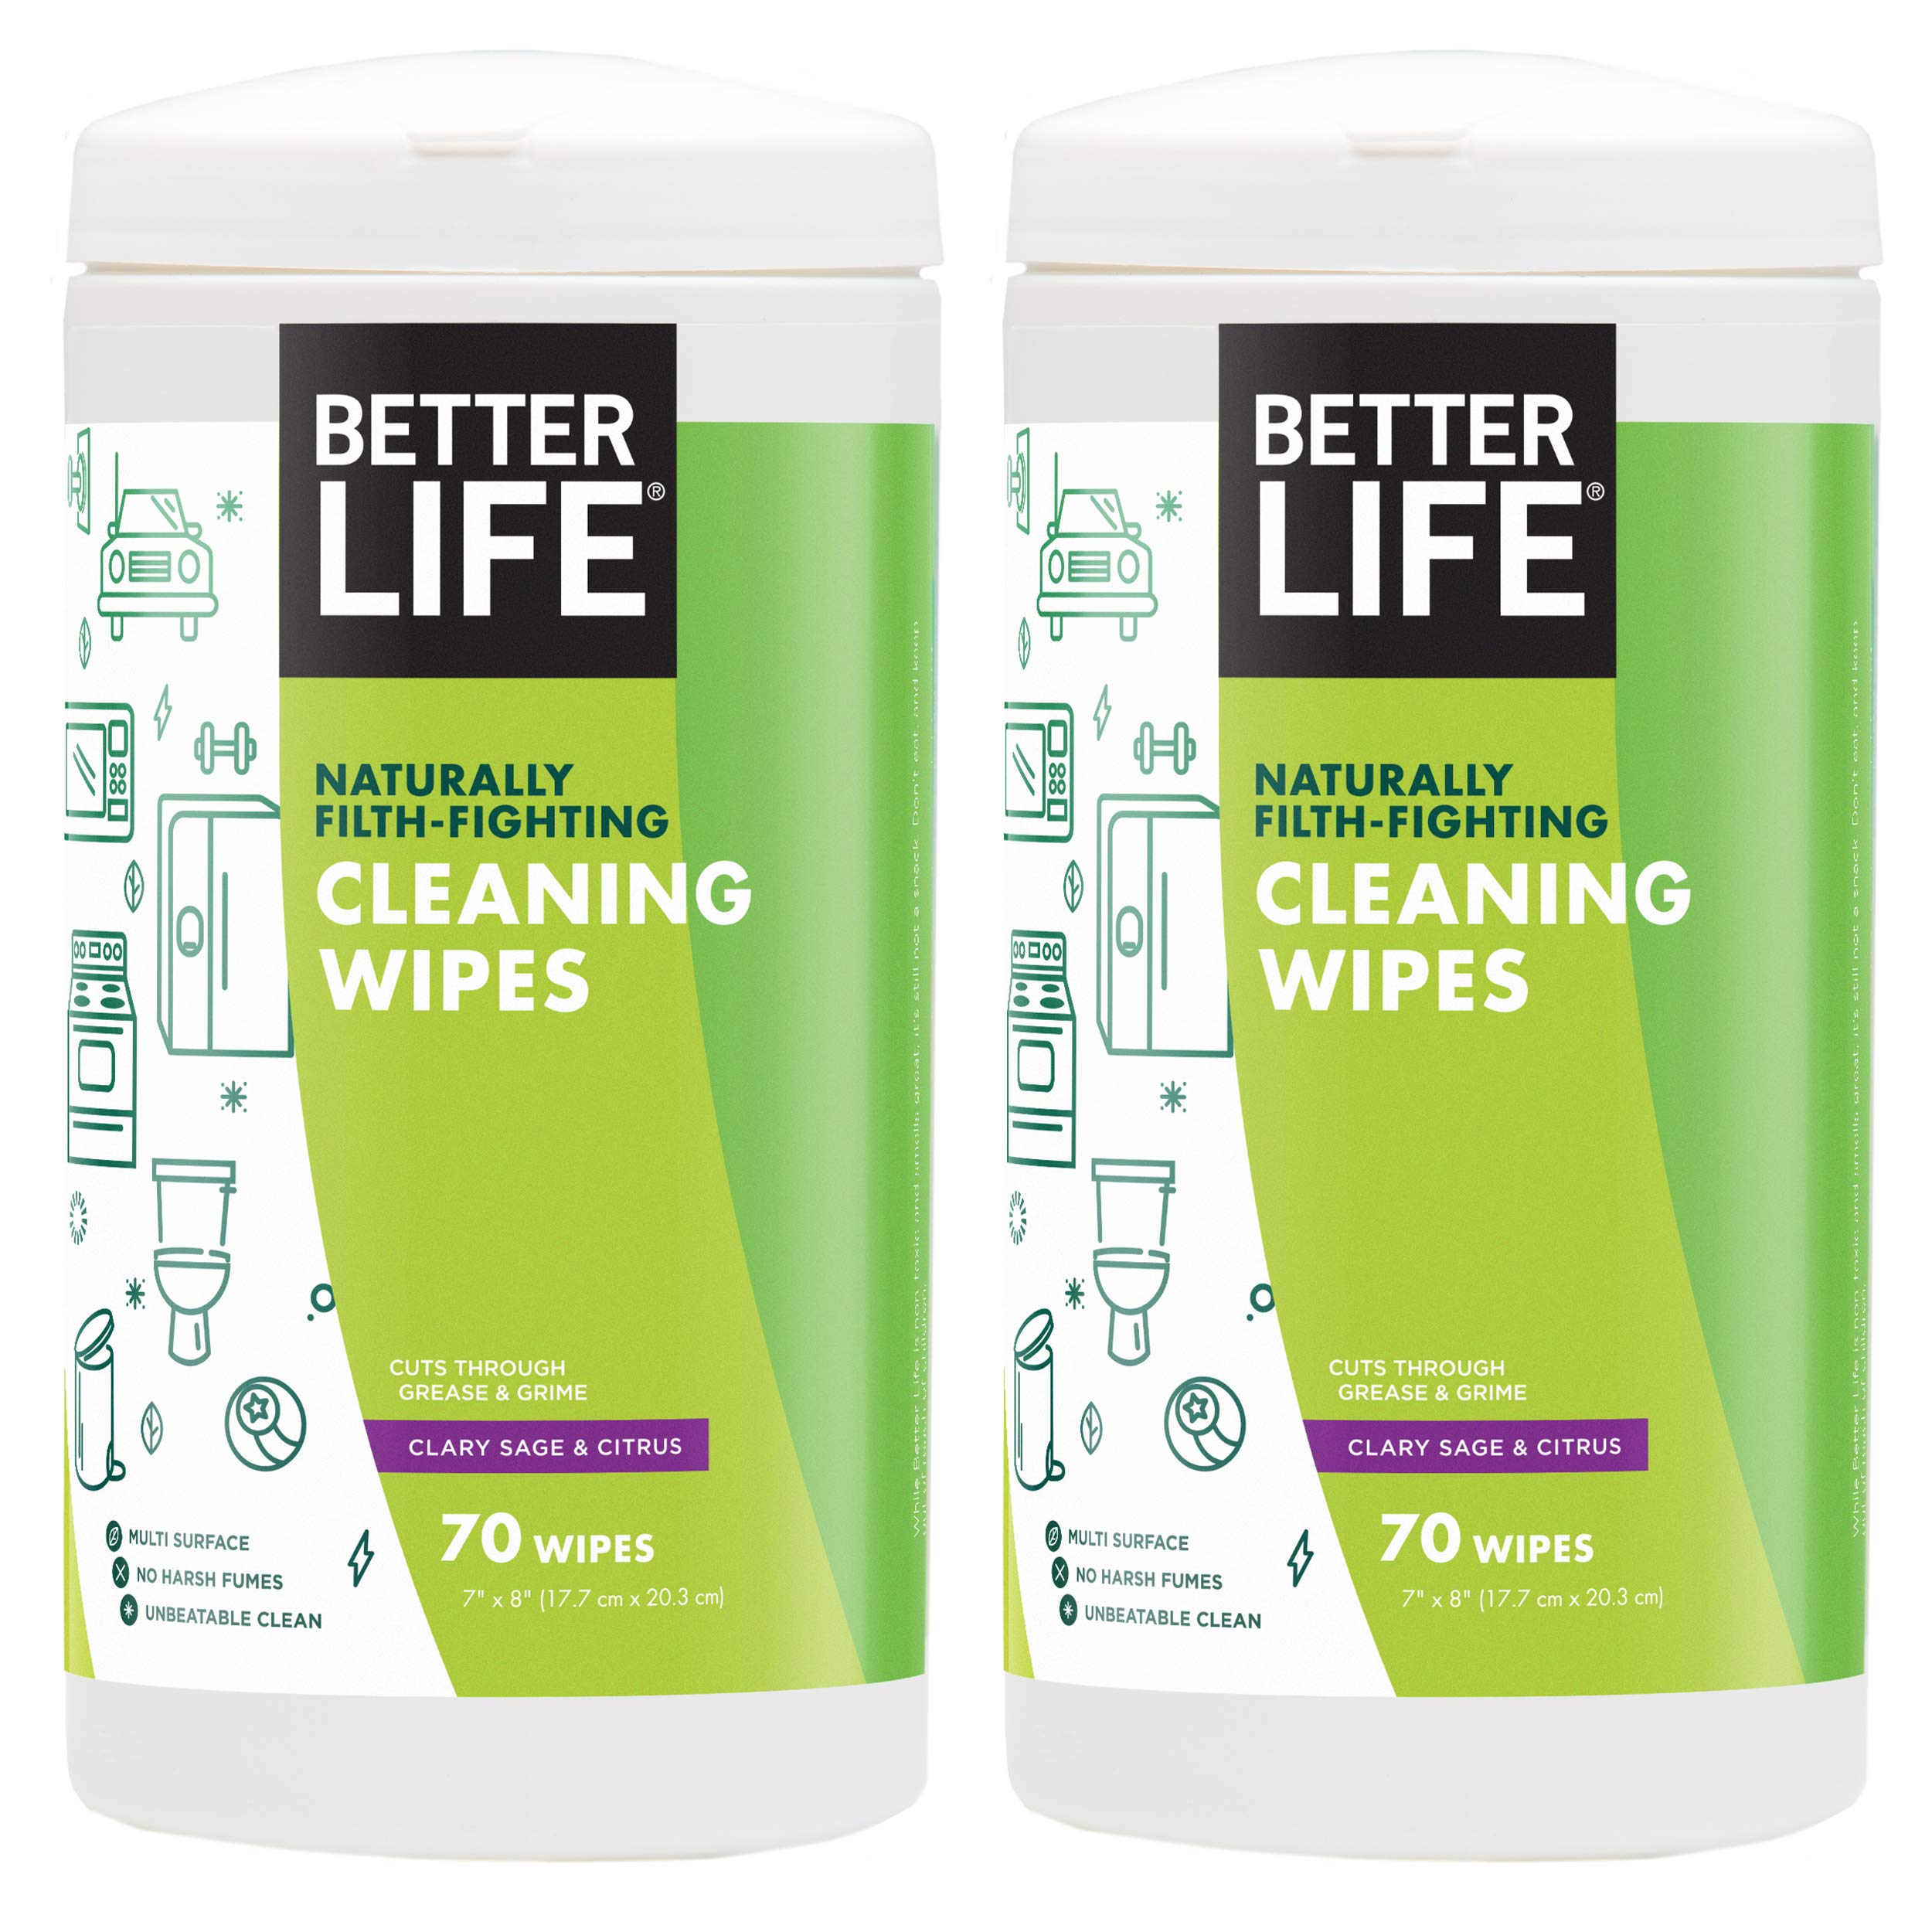 Better Life (@CleanHappens) / X